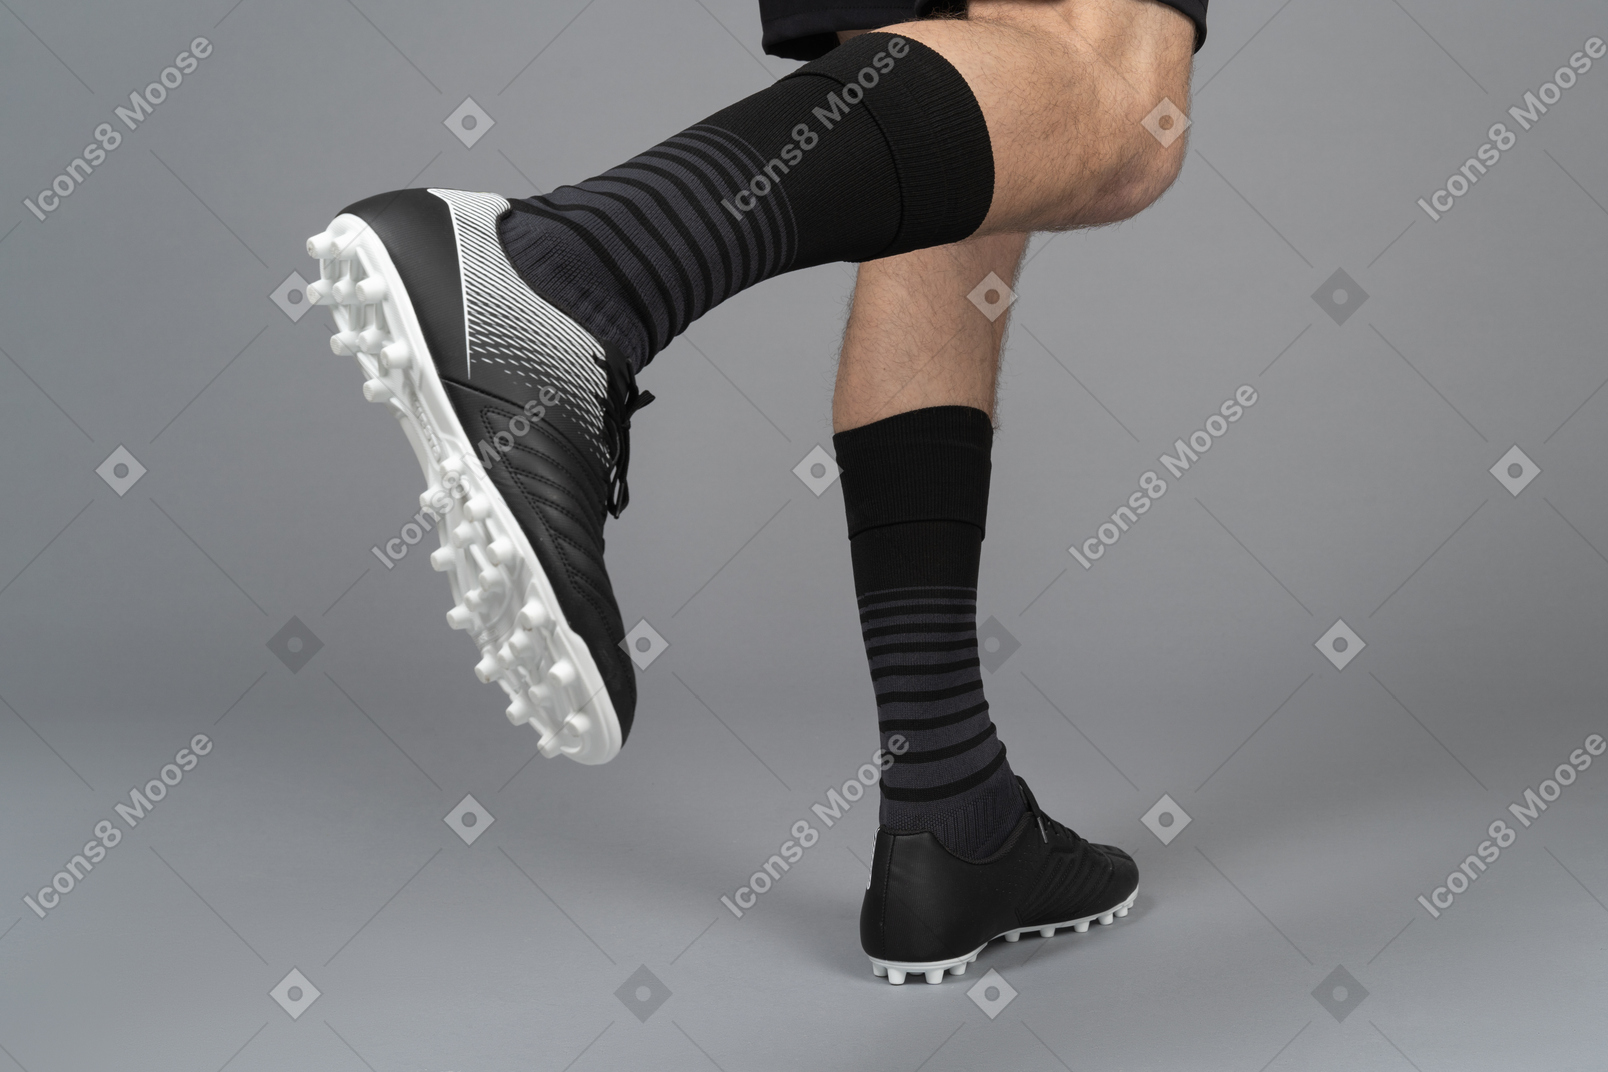 Close-up of a soccer player's legs